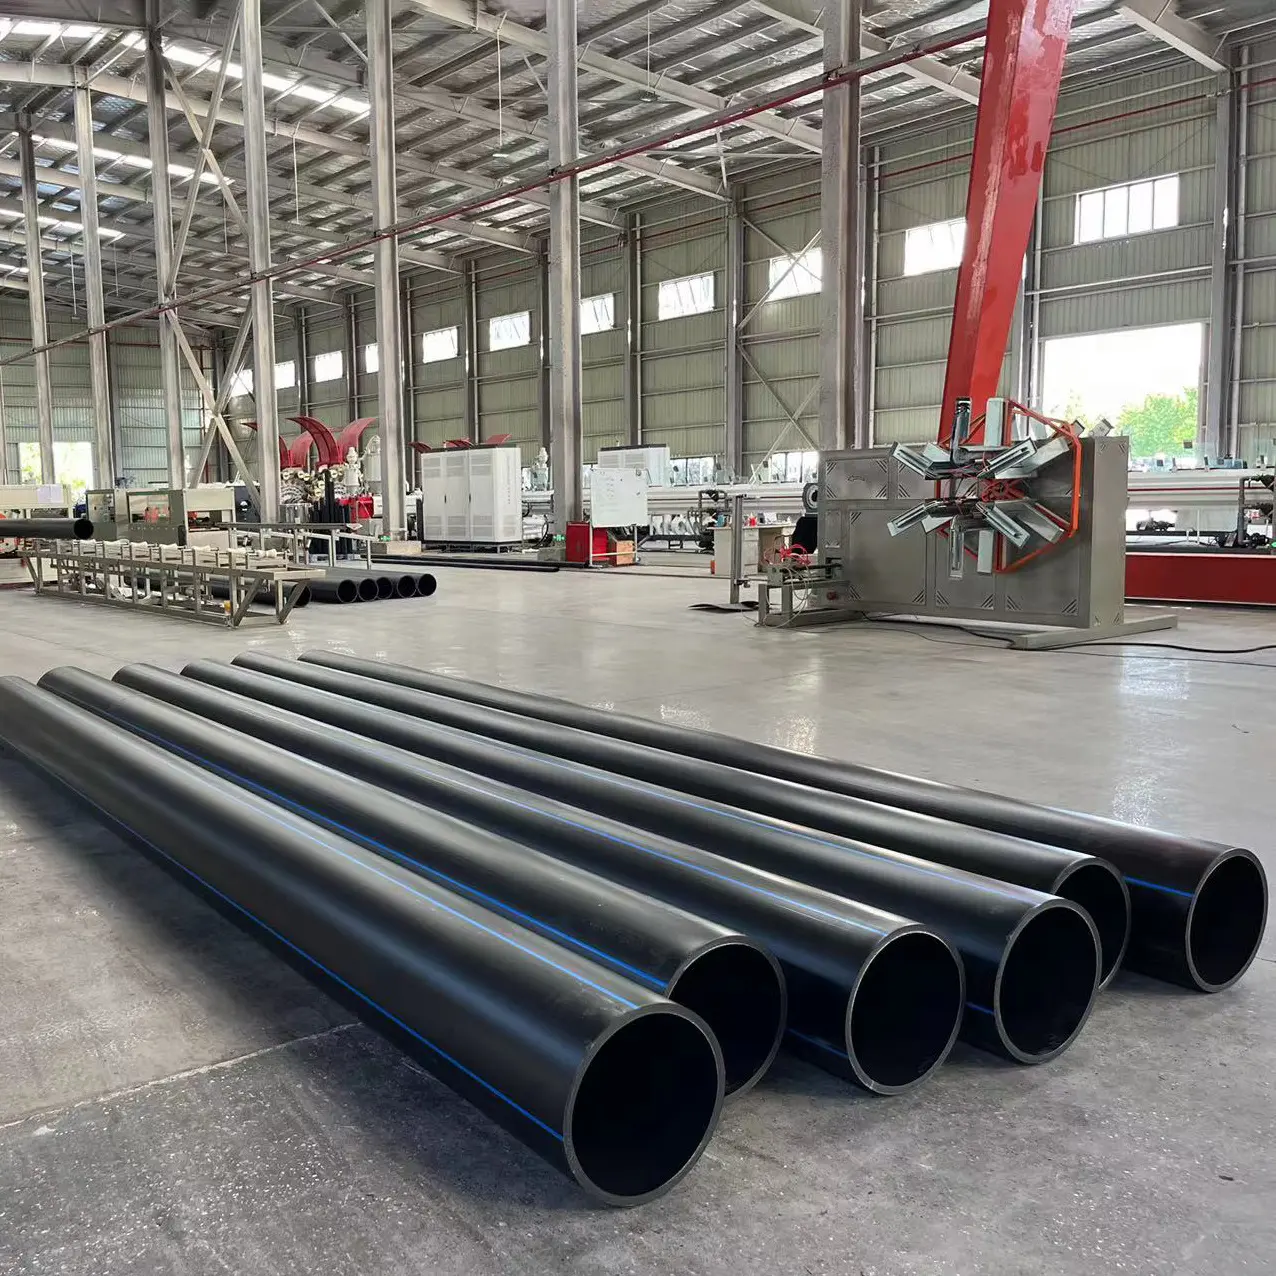 China Manufacturer 355 mm 560mm 110mm 250mm 40mm 75mm 160mm Pe100 Sdr 11 High Density Hdpe Pipe With Blue Strip